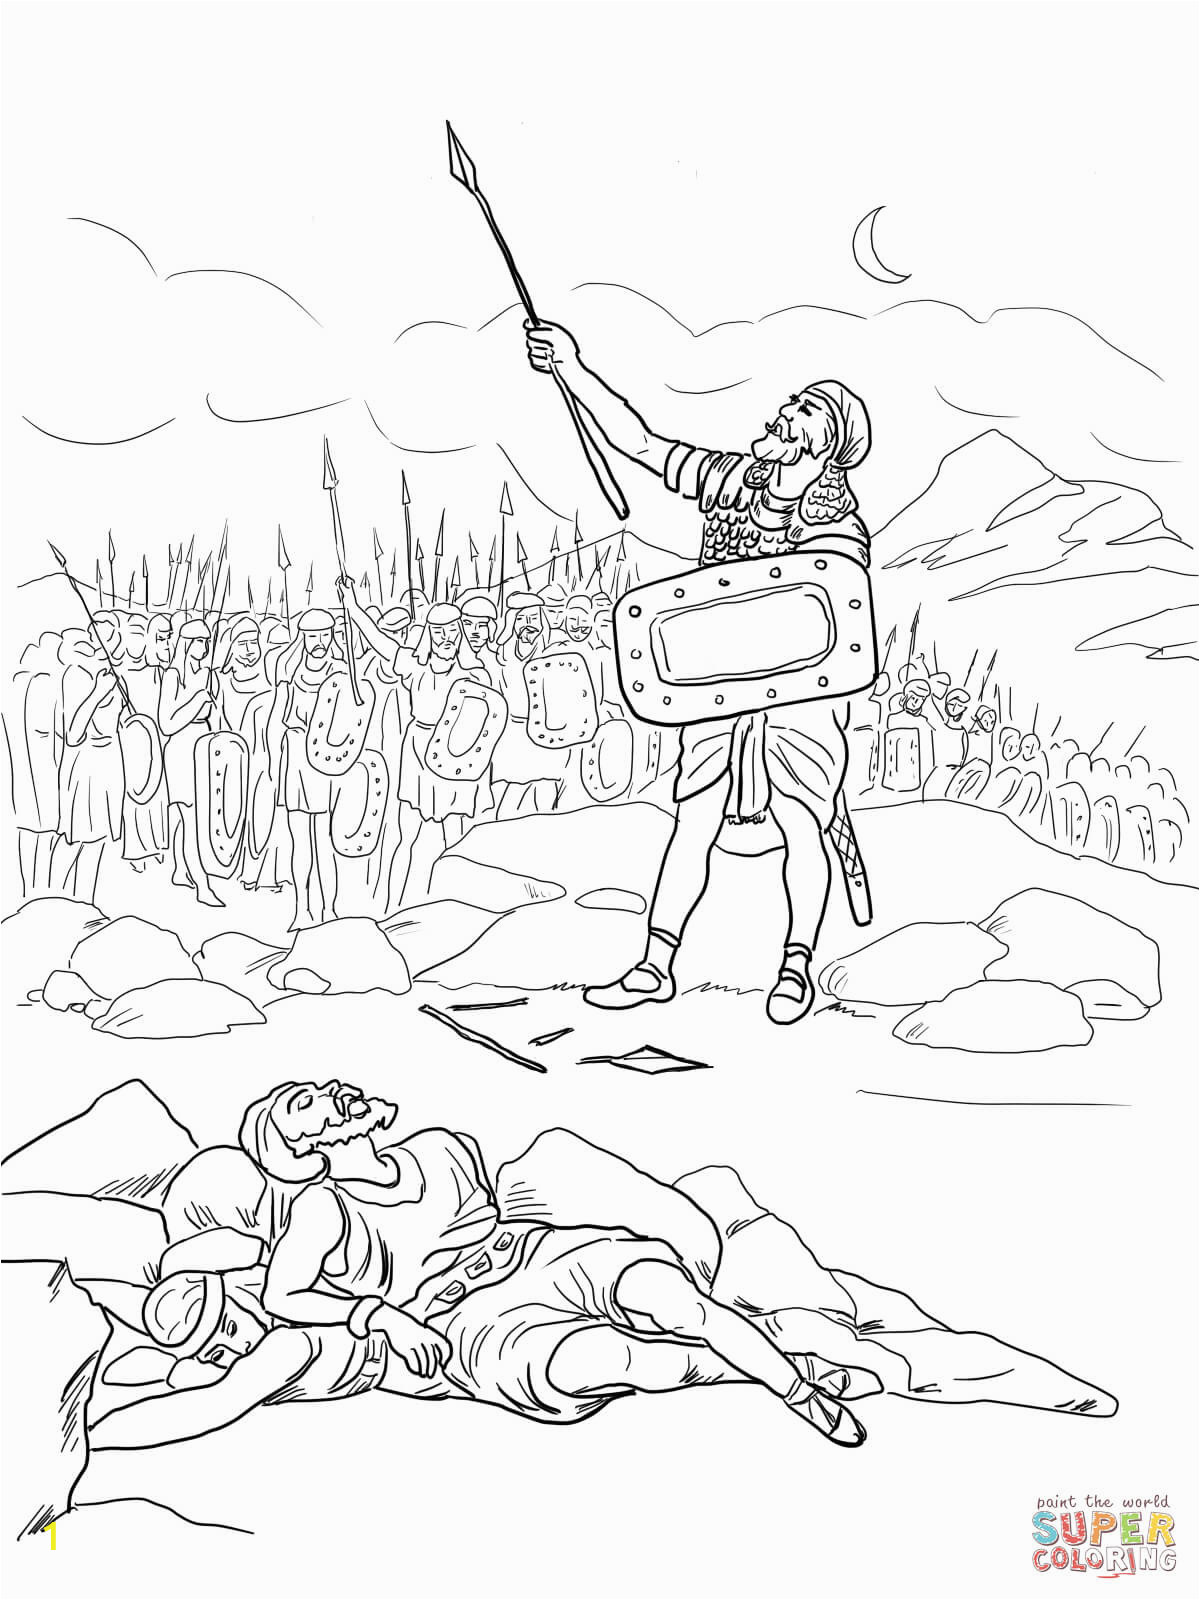 crossing the jordan river coloring pages